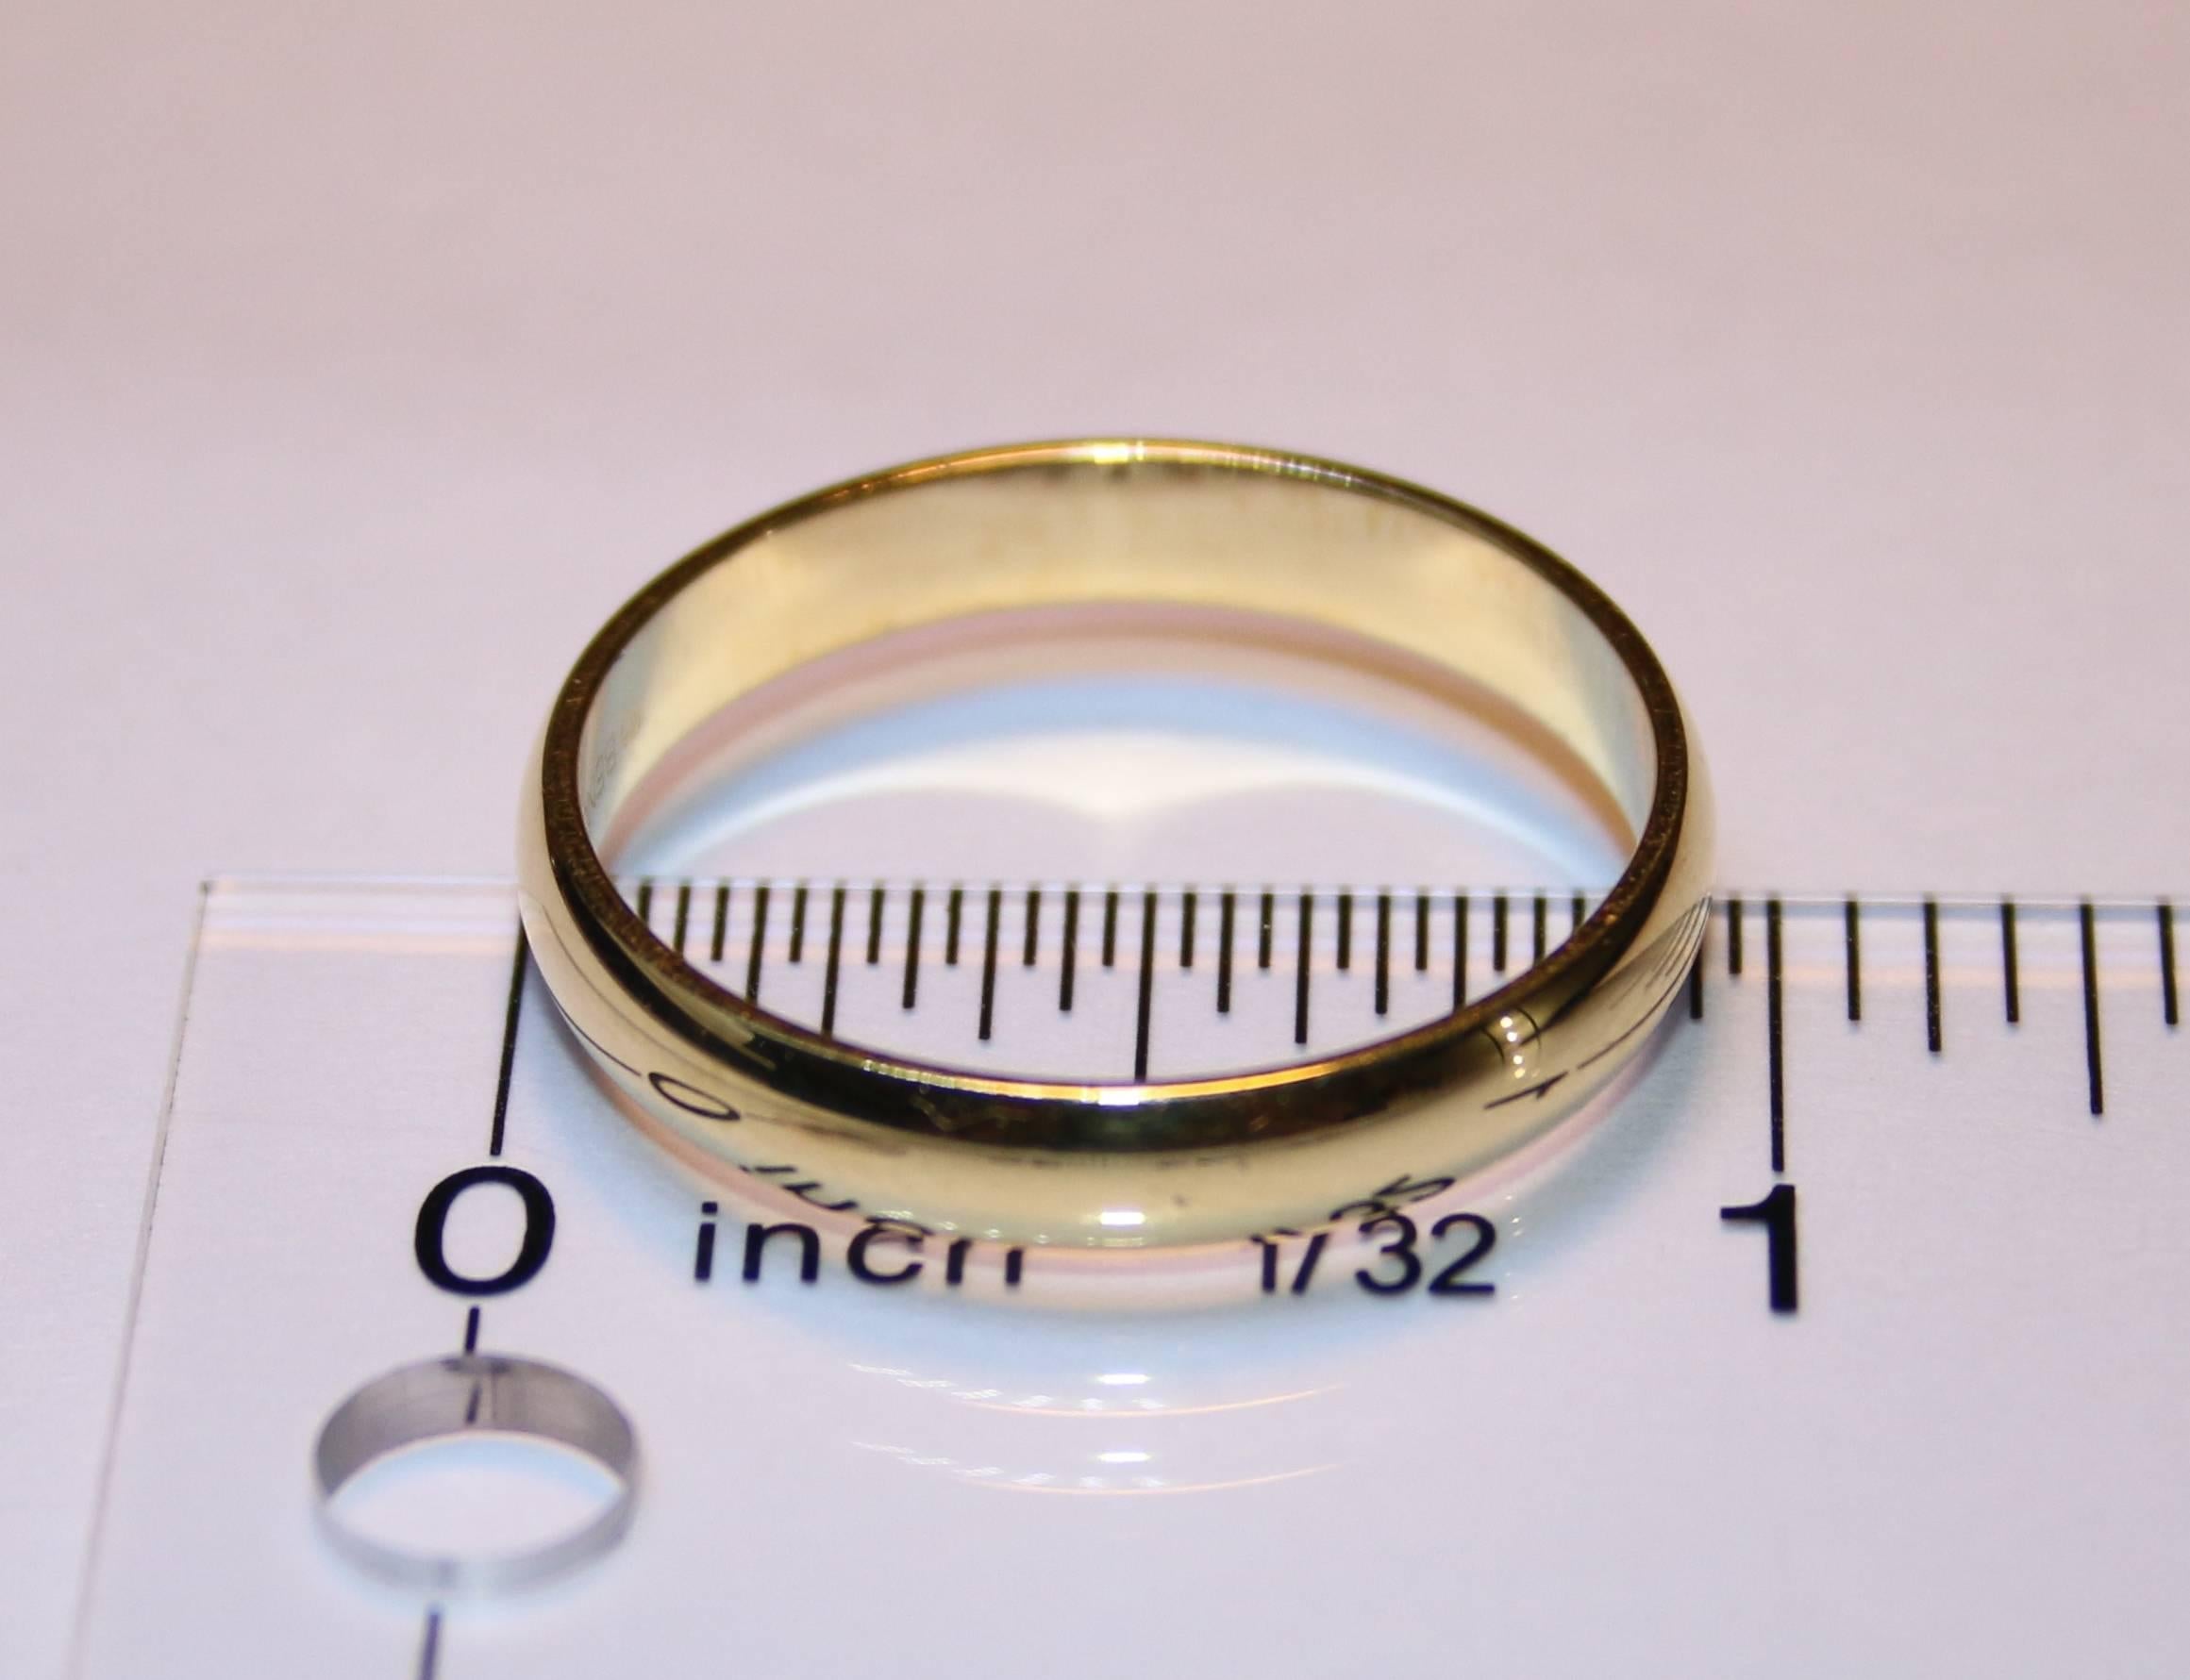 The wedding band is 18K Yellow Gold.
The band is 4.0mm wide.
The ring is a size 12.25, sizable.
The ring weighs 4.8 grams